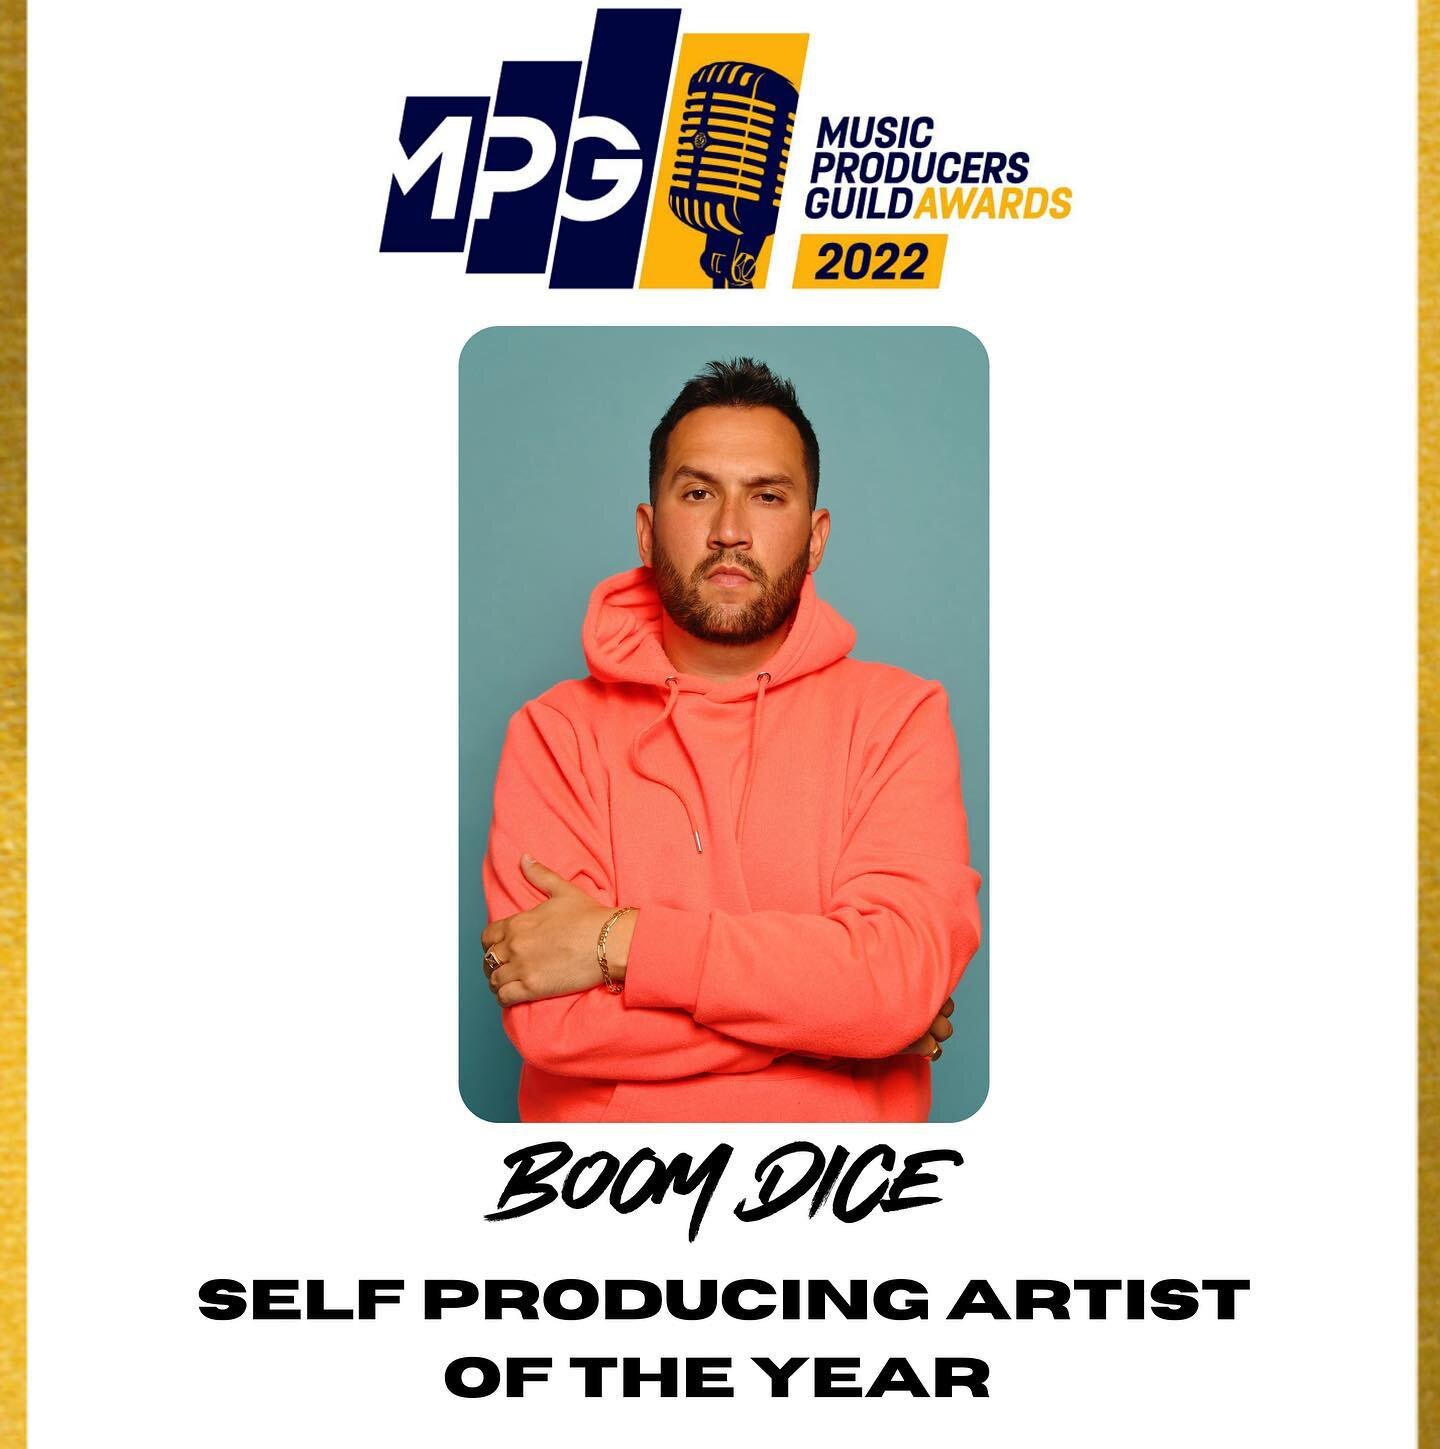 I was put forward by @boomdicepresents for Self Producing Artist of The Year at the @musicproducersguild #awards. Always moved in the shadows but MPG members, do the different thing this year and vote for your boy to continue changing the landscape o